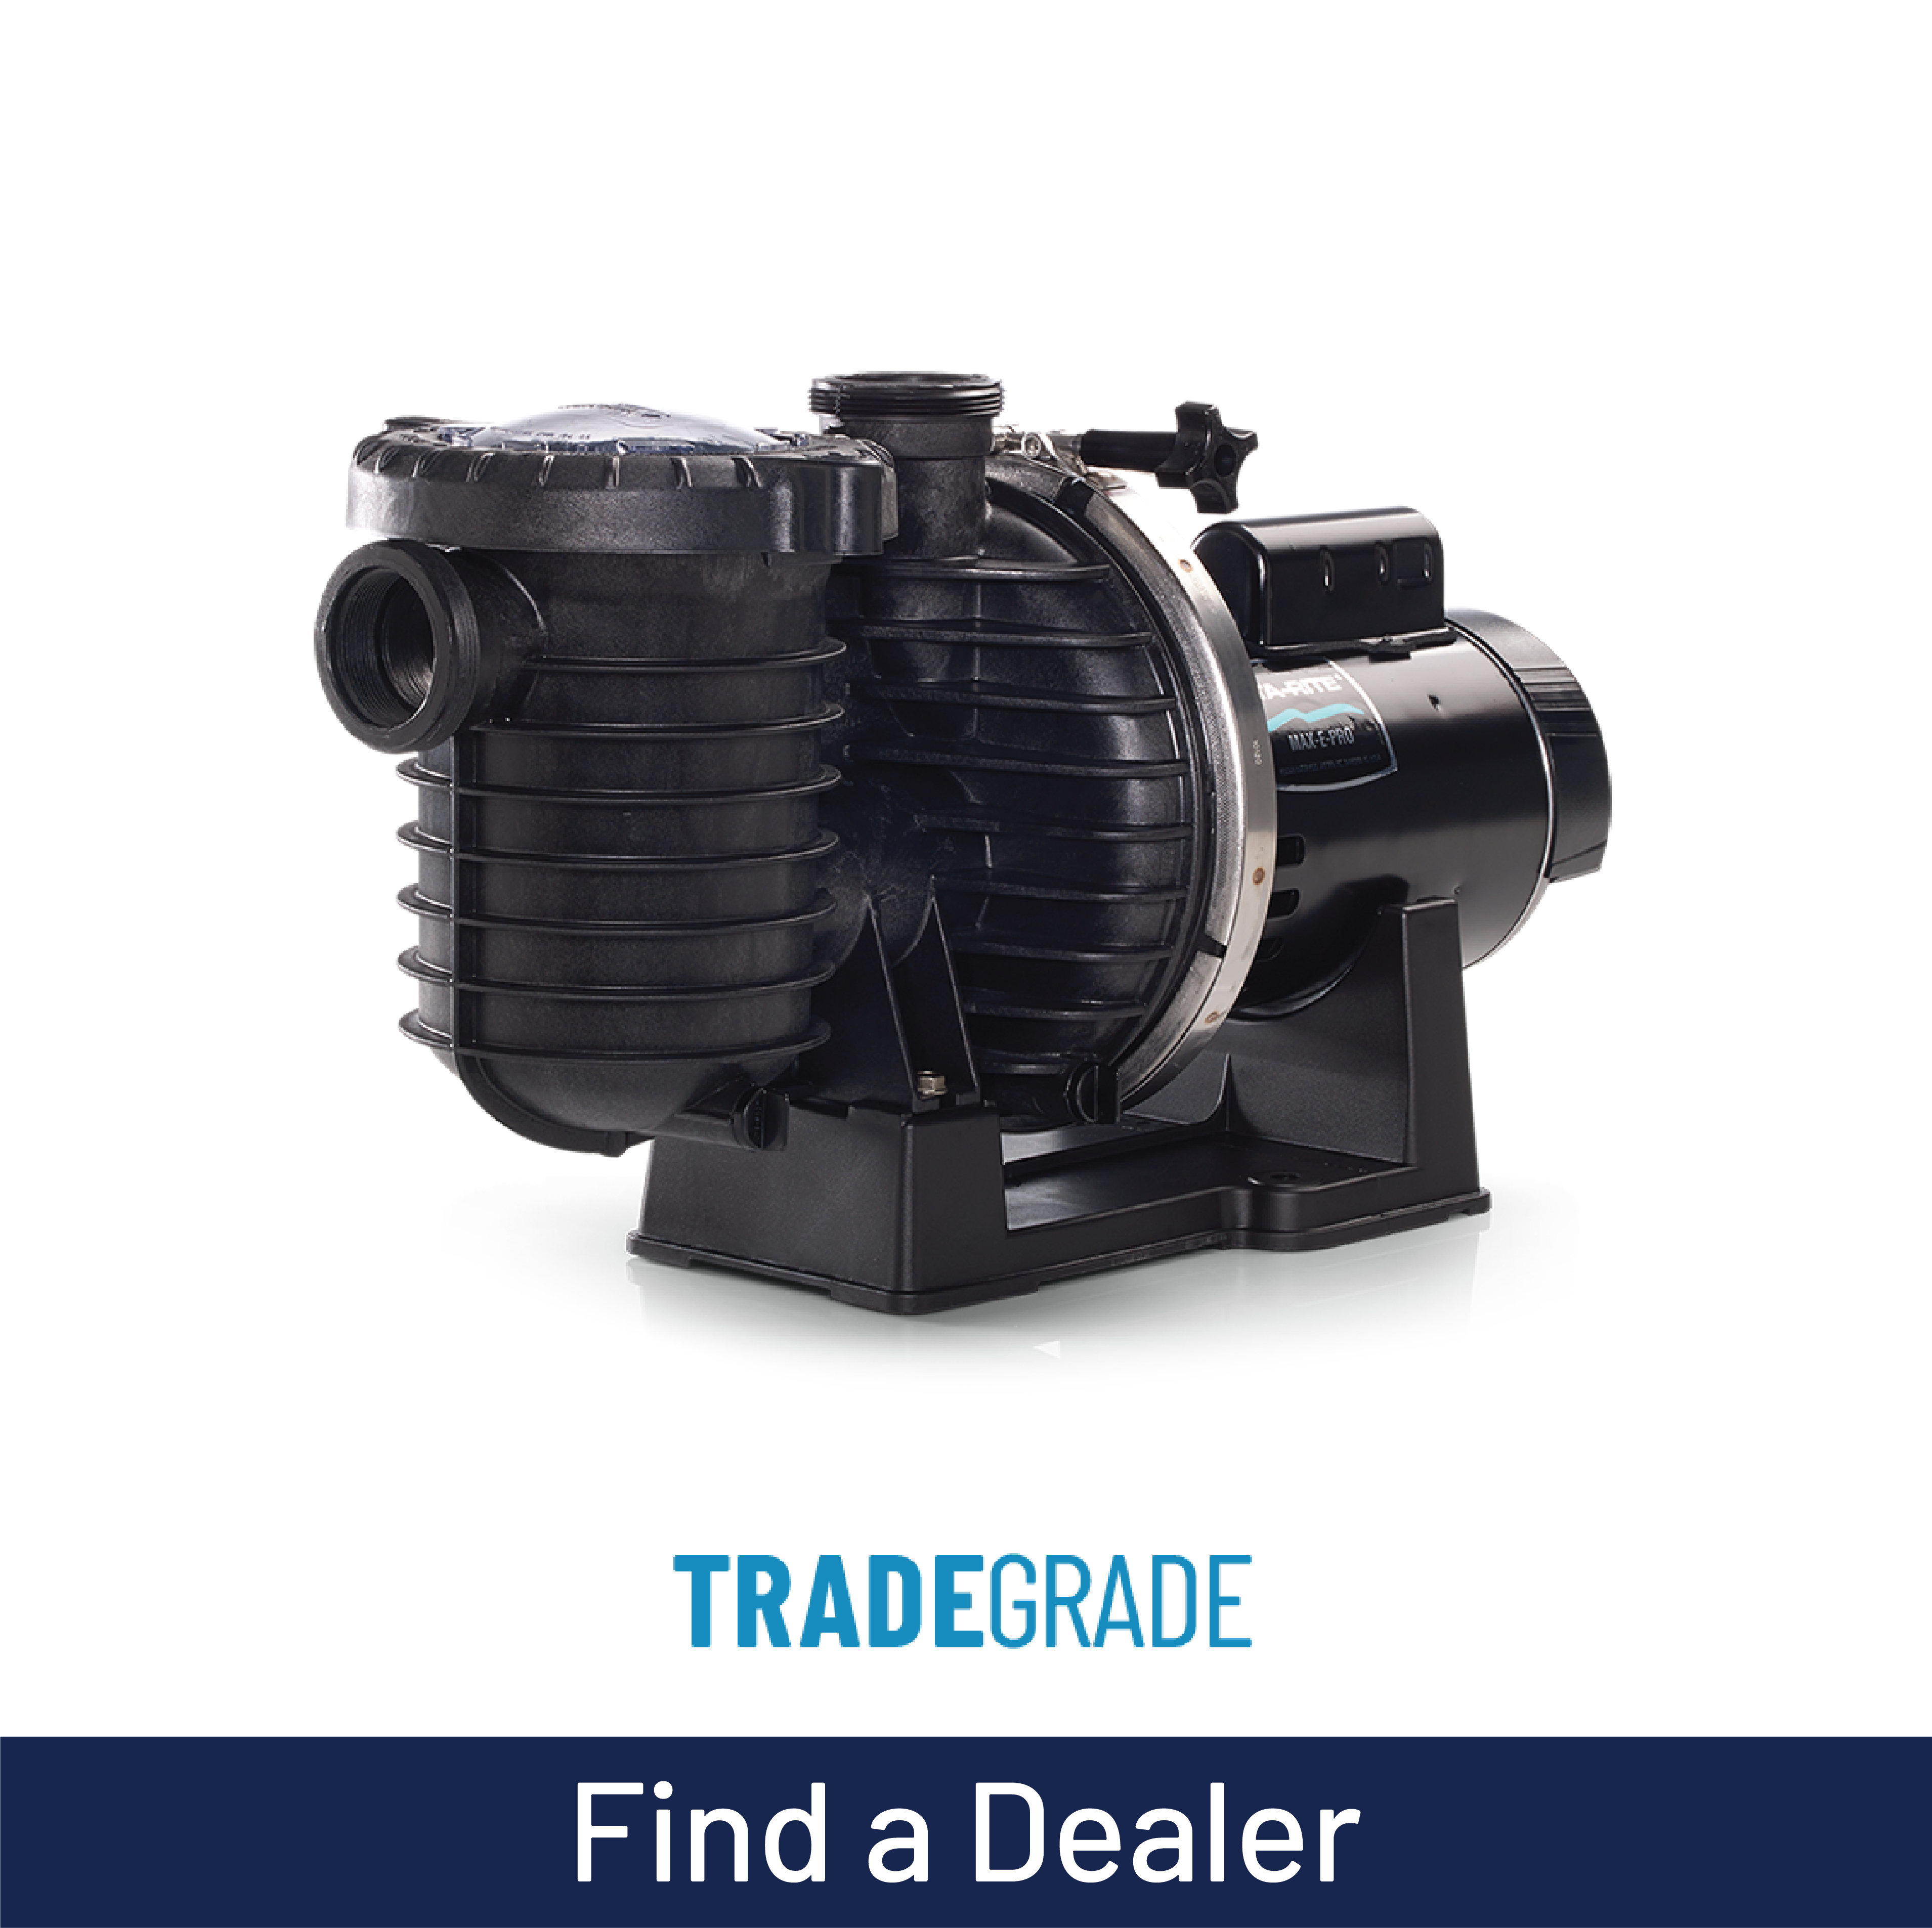 Max E Pro pump with Trade Grade and Find a Dealer tag